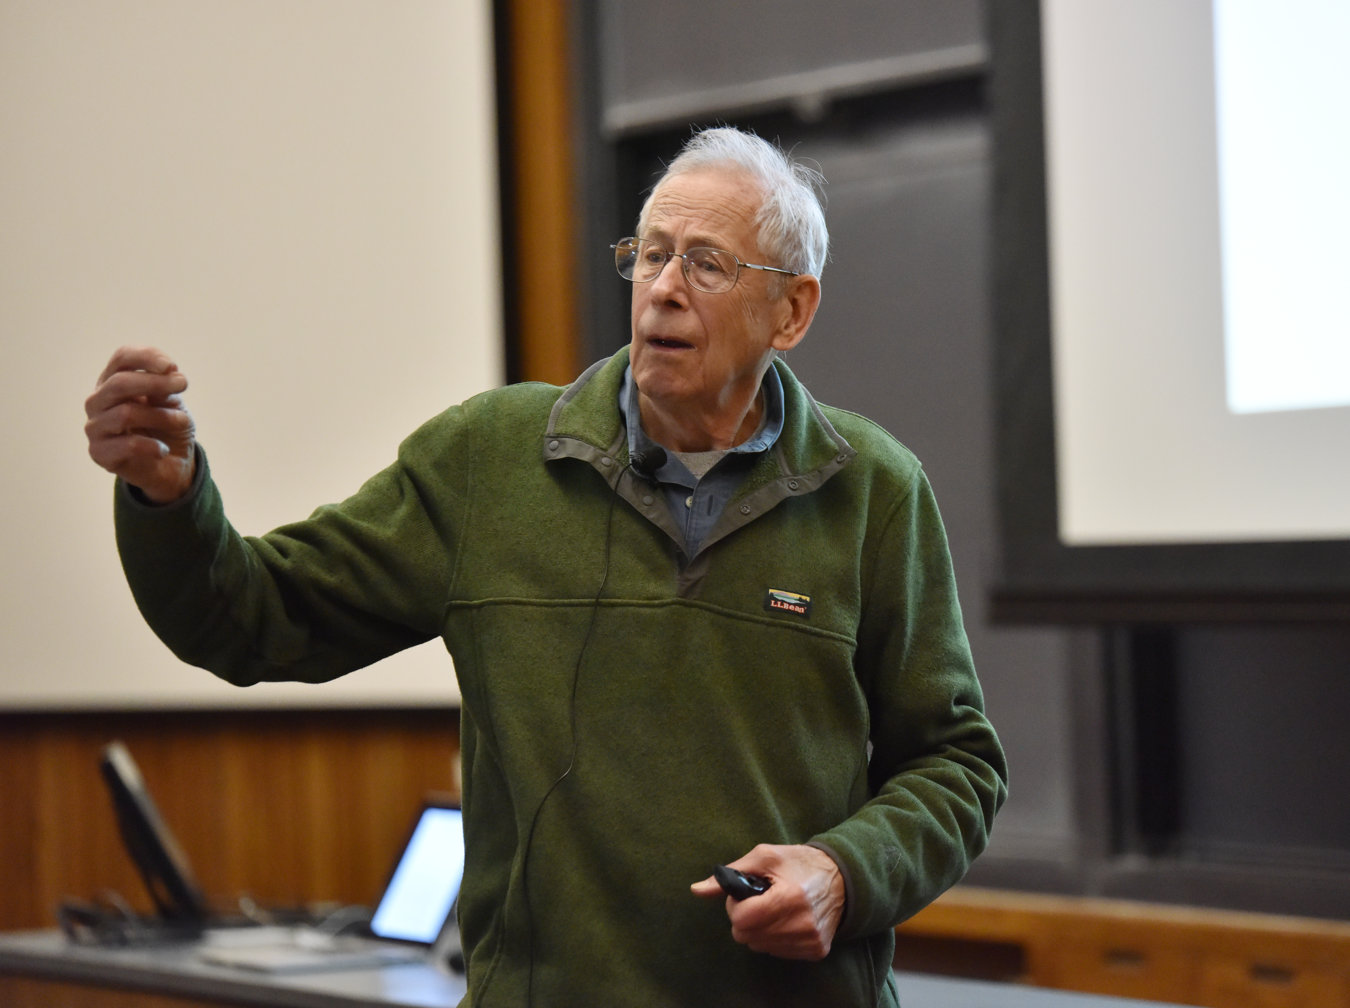 Peebles lecturing at Princeton in 2016